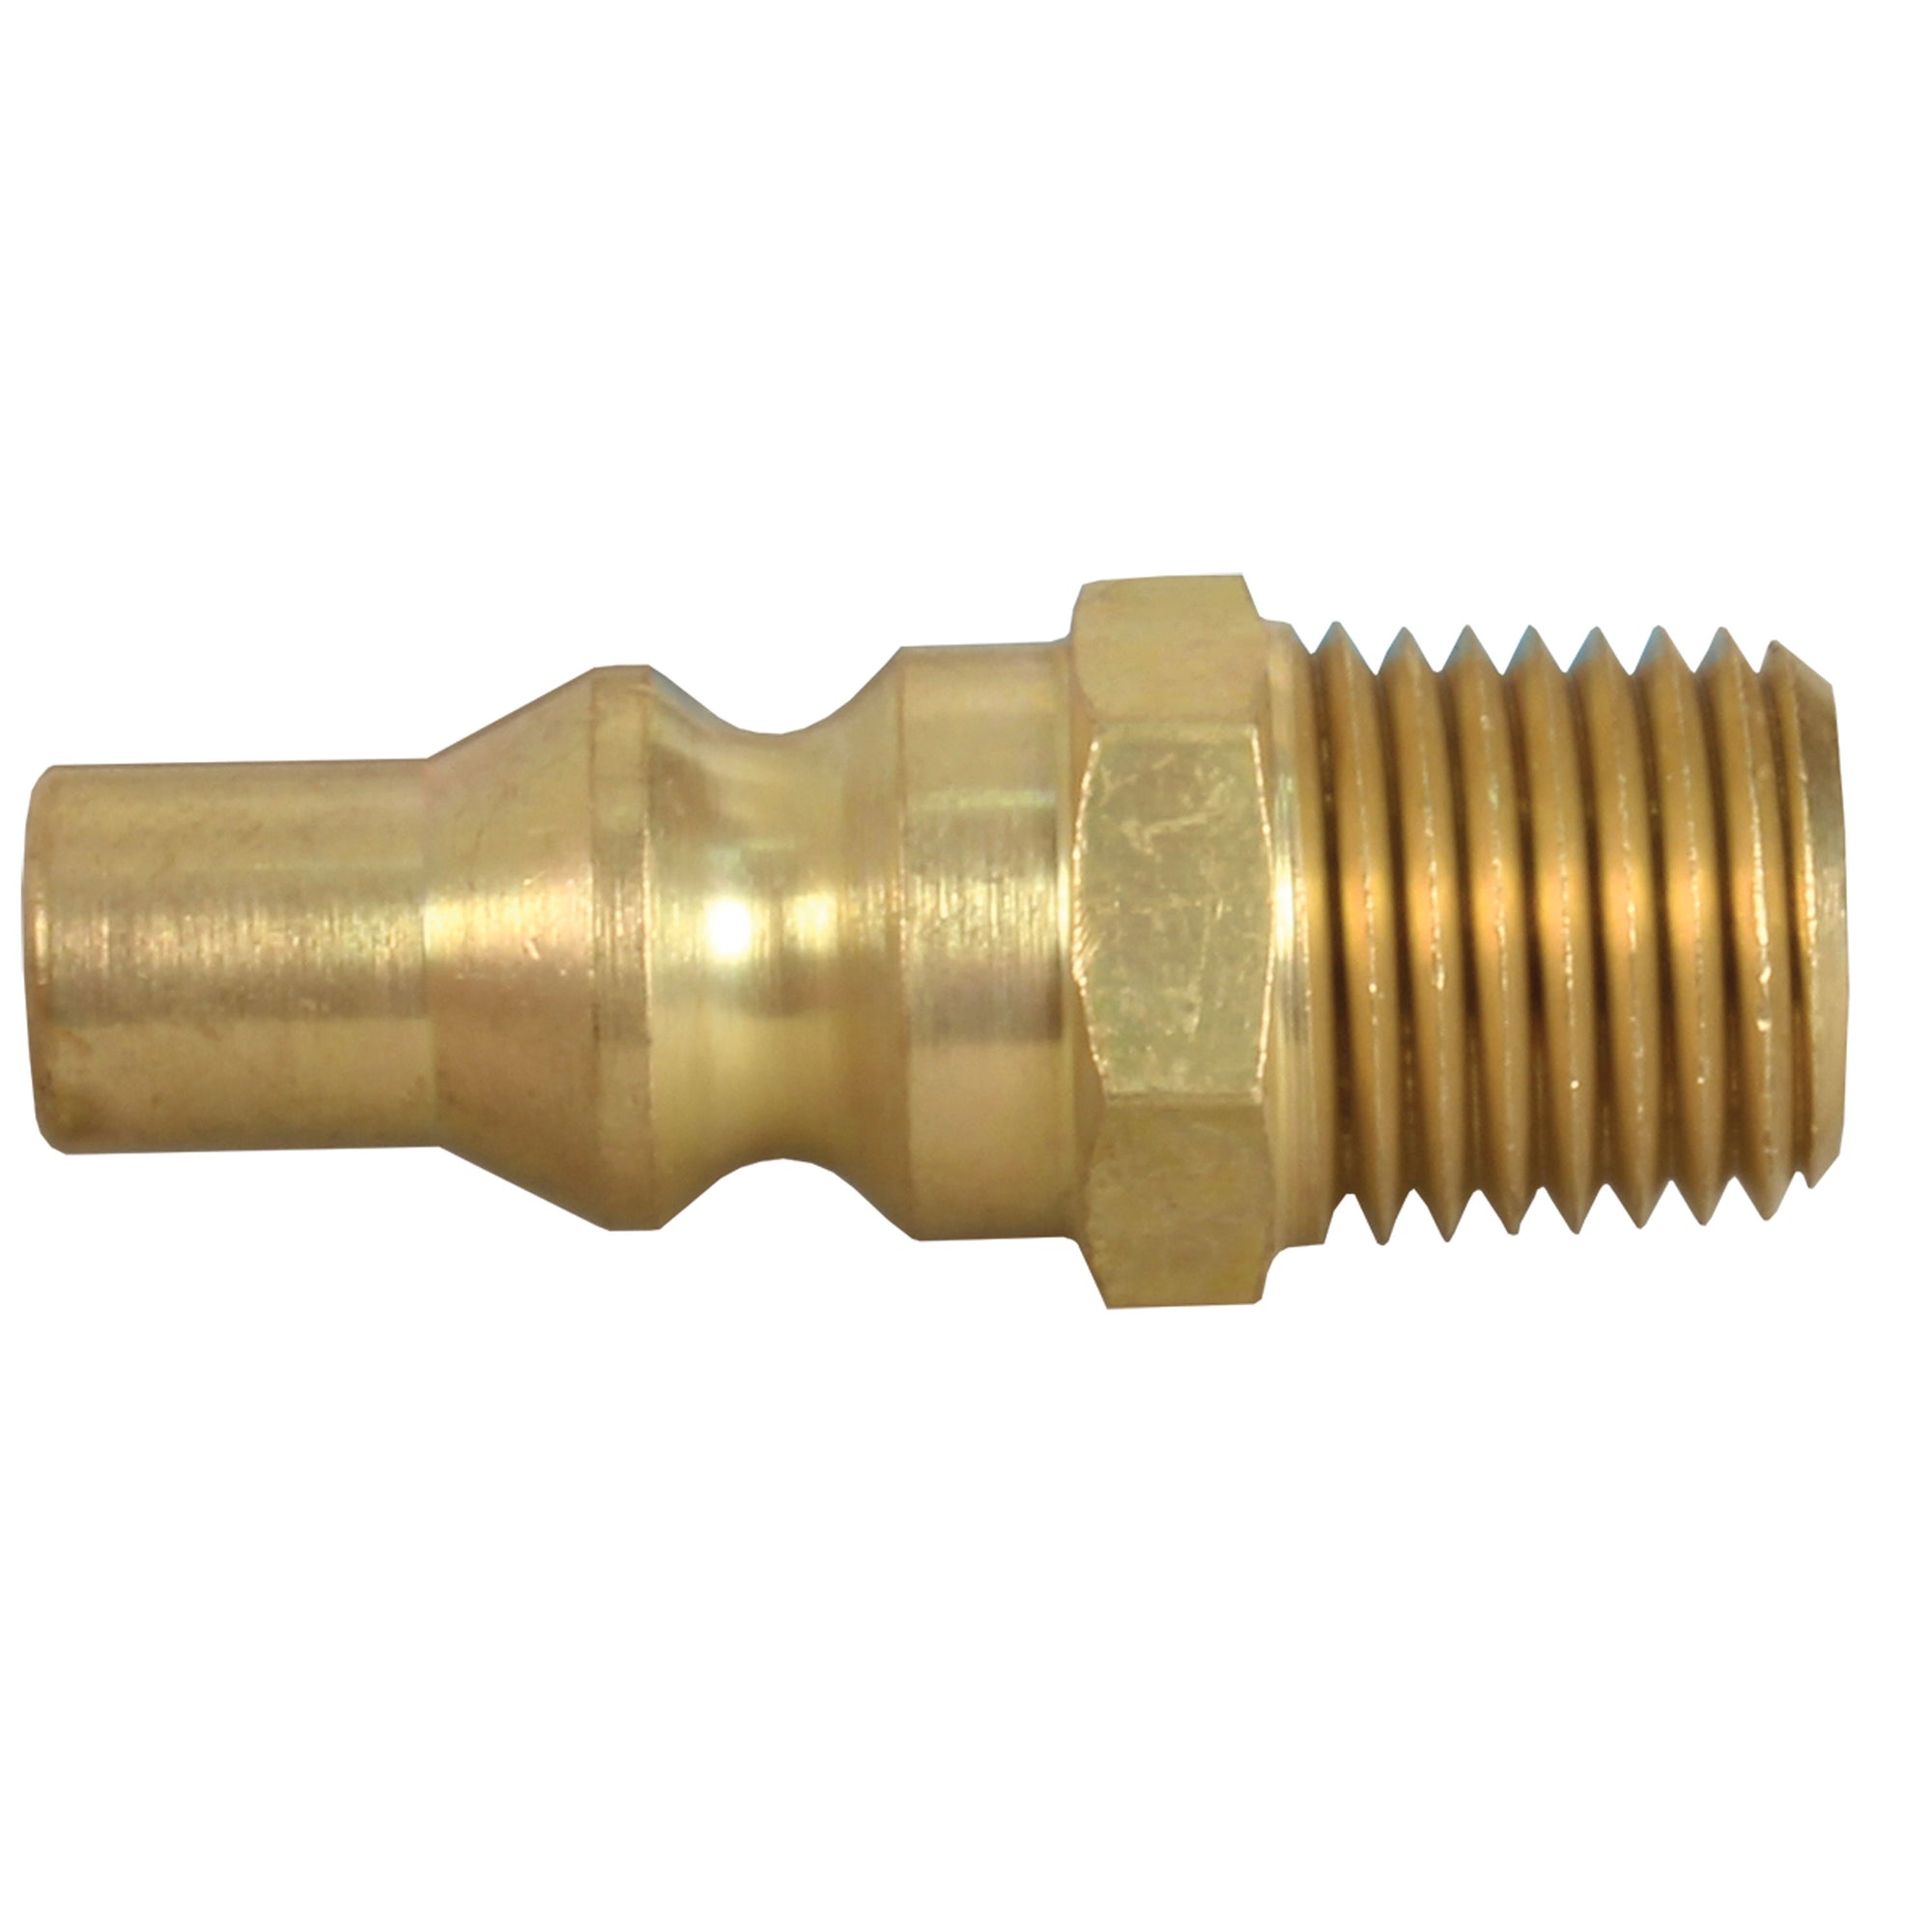 JR Products 07-30445 Quick Coupler Connection - 1/4" MPT x Male Quick Disconnect